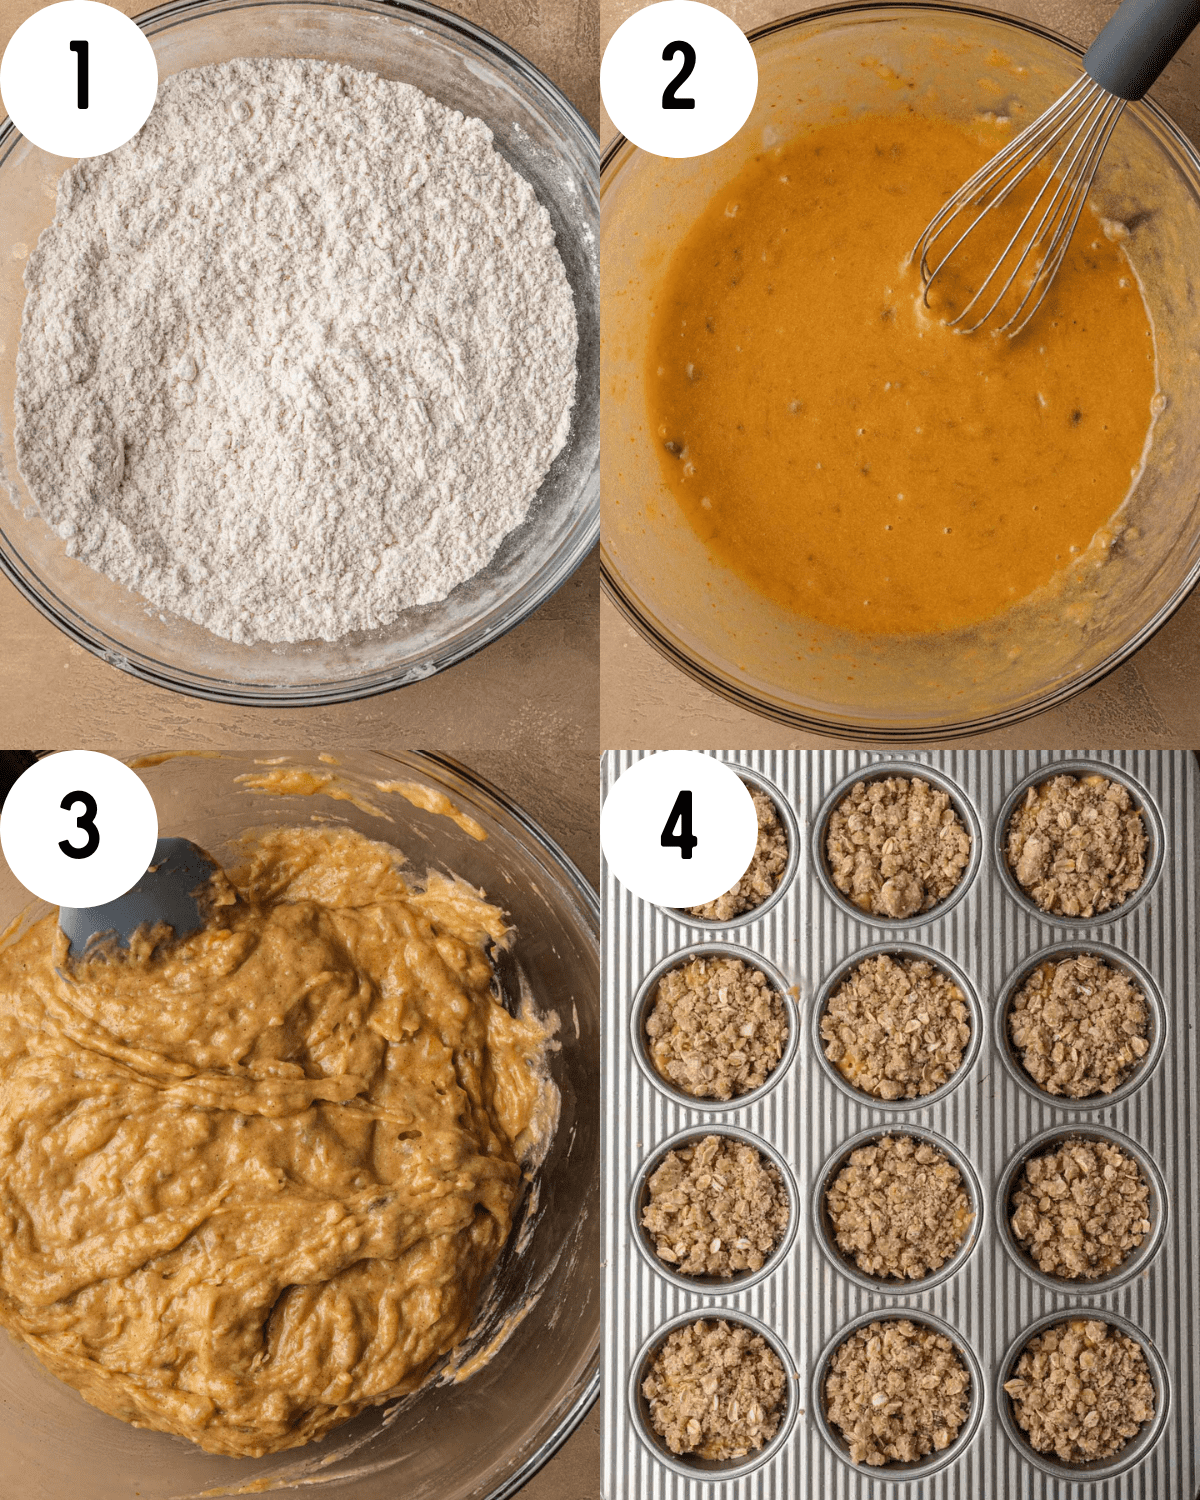 How to make Pumpkin Banana Muffins. 1. Dry ingredients in glass mixing bowl. 2. Wet ingredients in glass mixing bowl with whisk. 3. Pumpkin Banana muffin batter in glass mixing bowl. 4. Pumpkin Banana muffins divided into muffin pan with oat streusel topping.